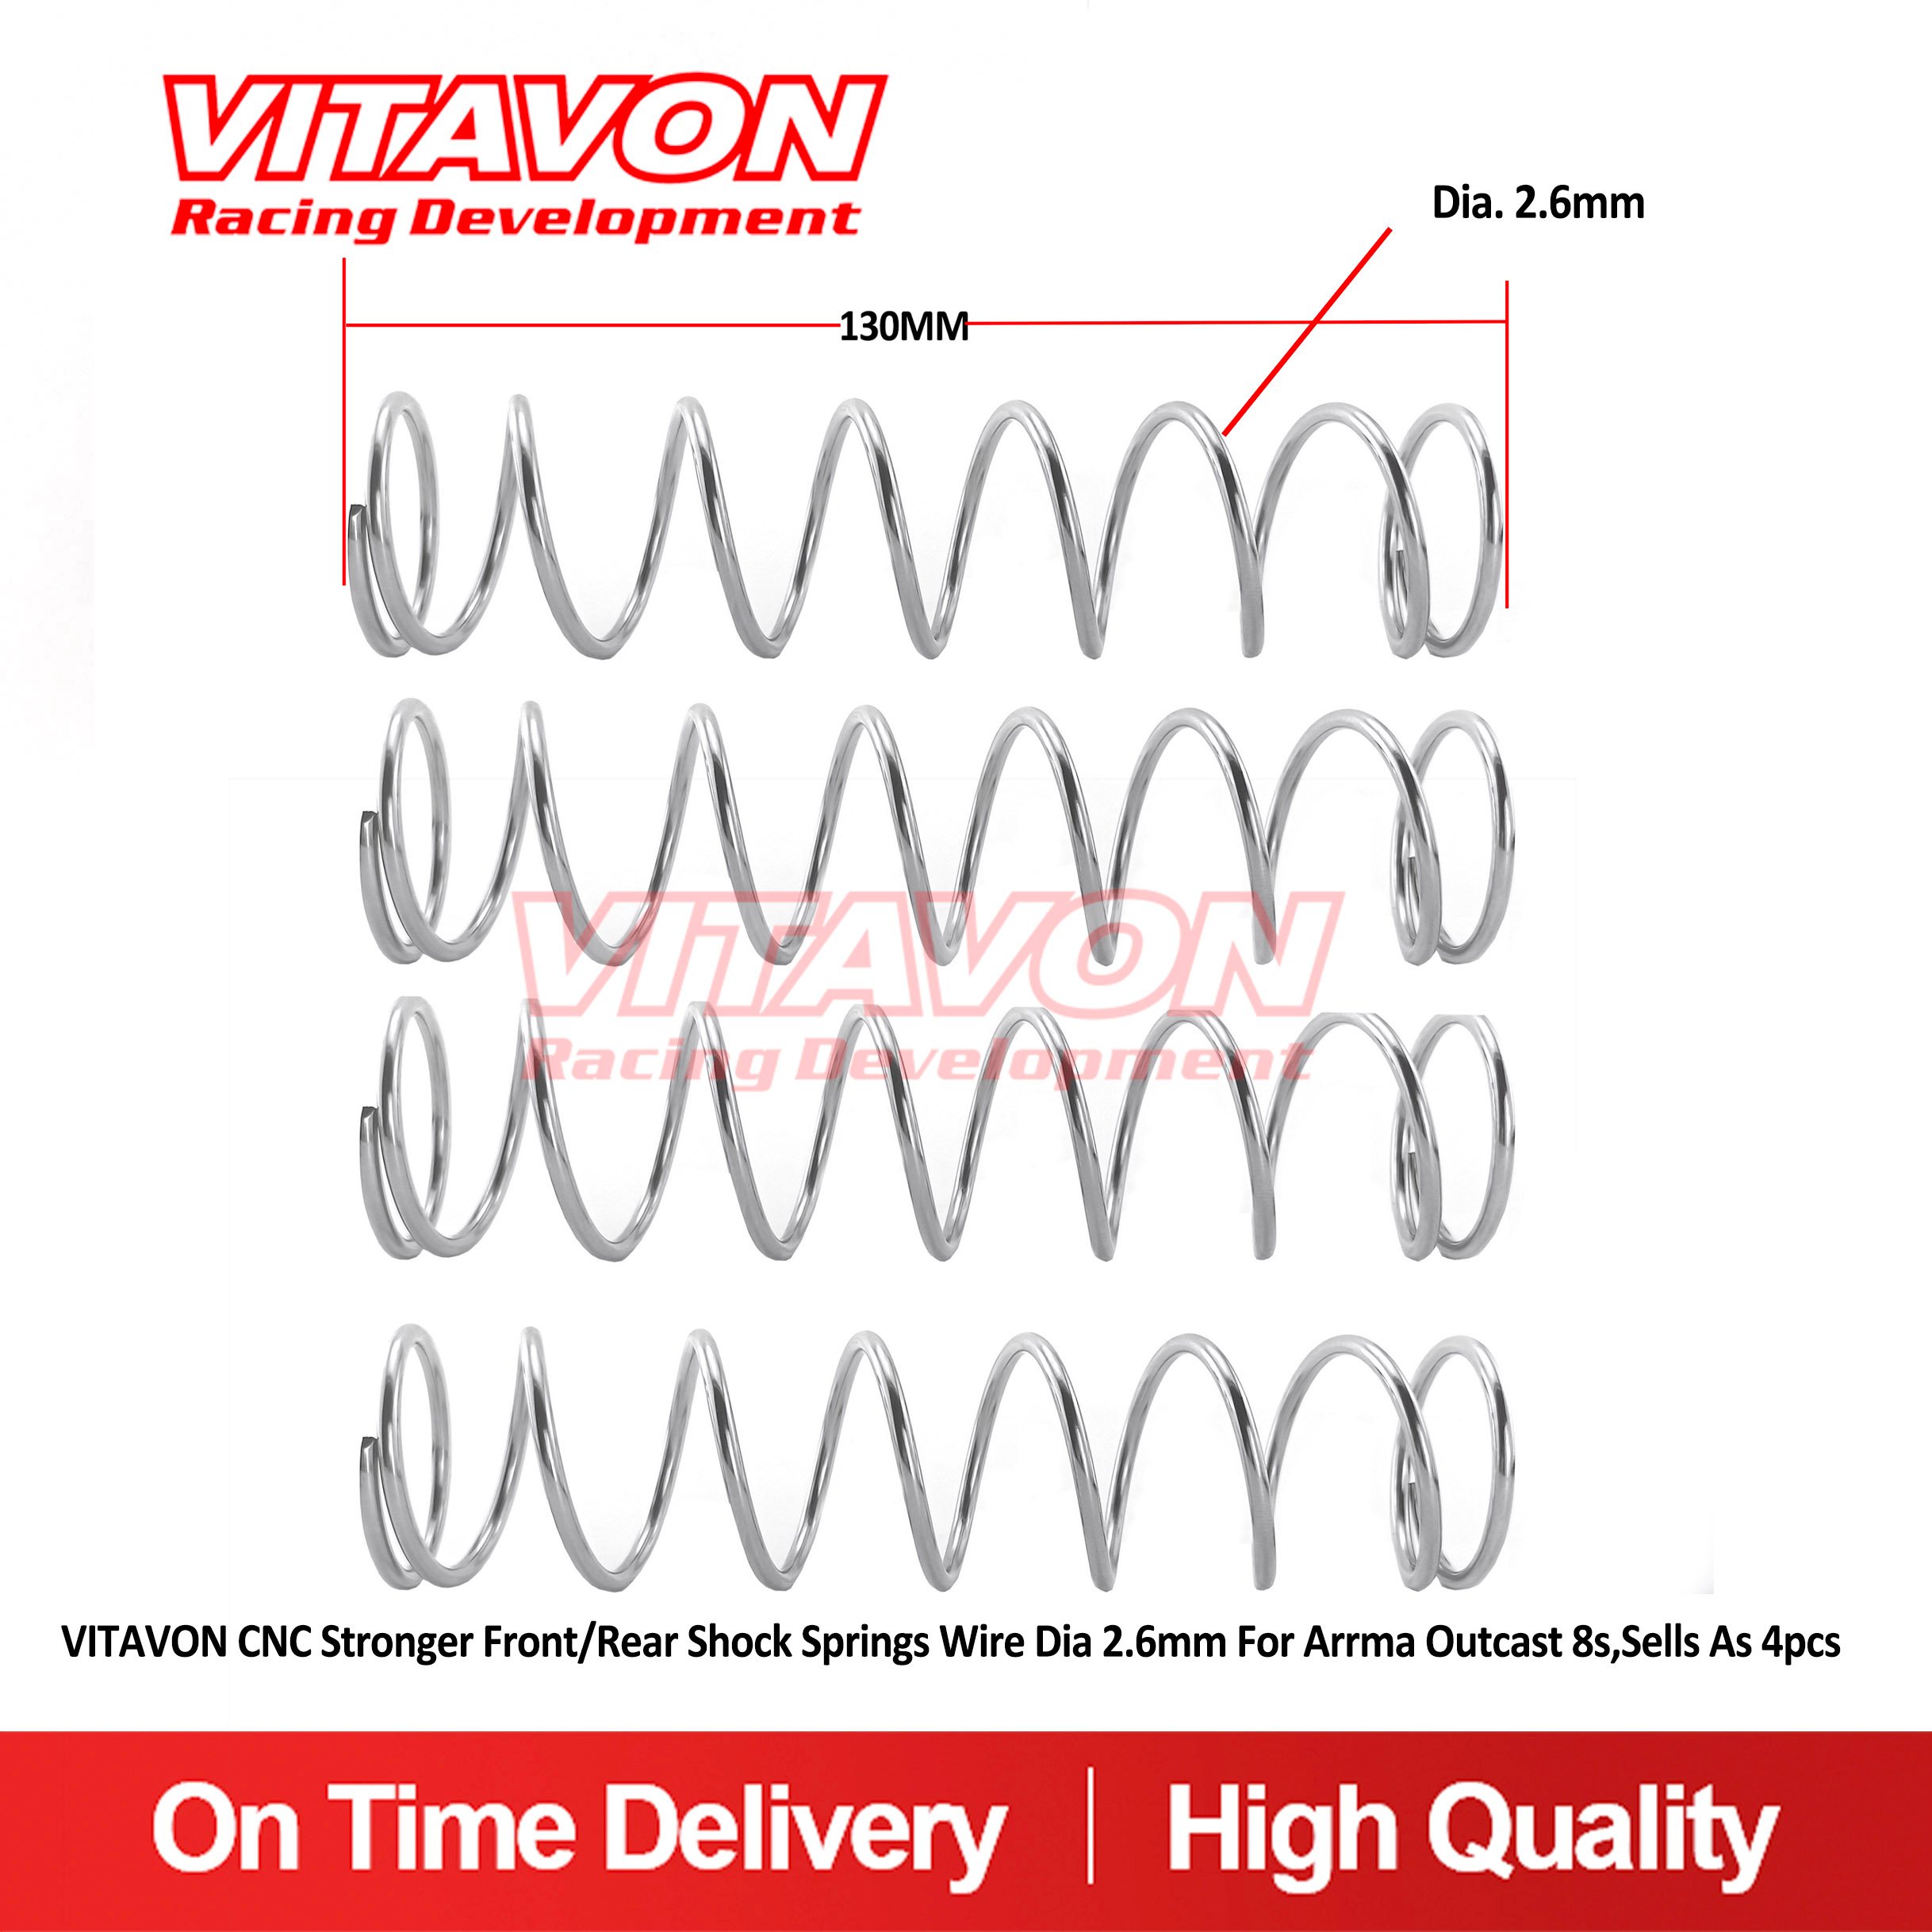 VITAVON CNC Stronger Front/Rear shock Springs Wire Dia 2.6mm For Arrma Outcast 8s,sells as 4pcs